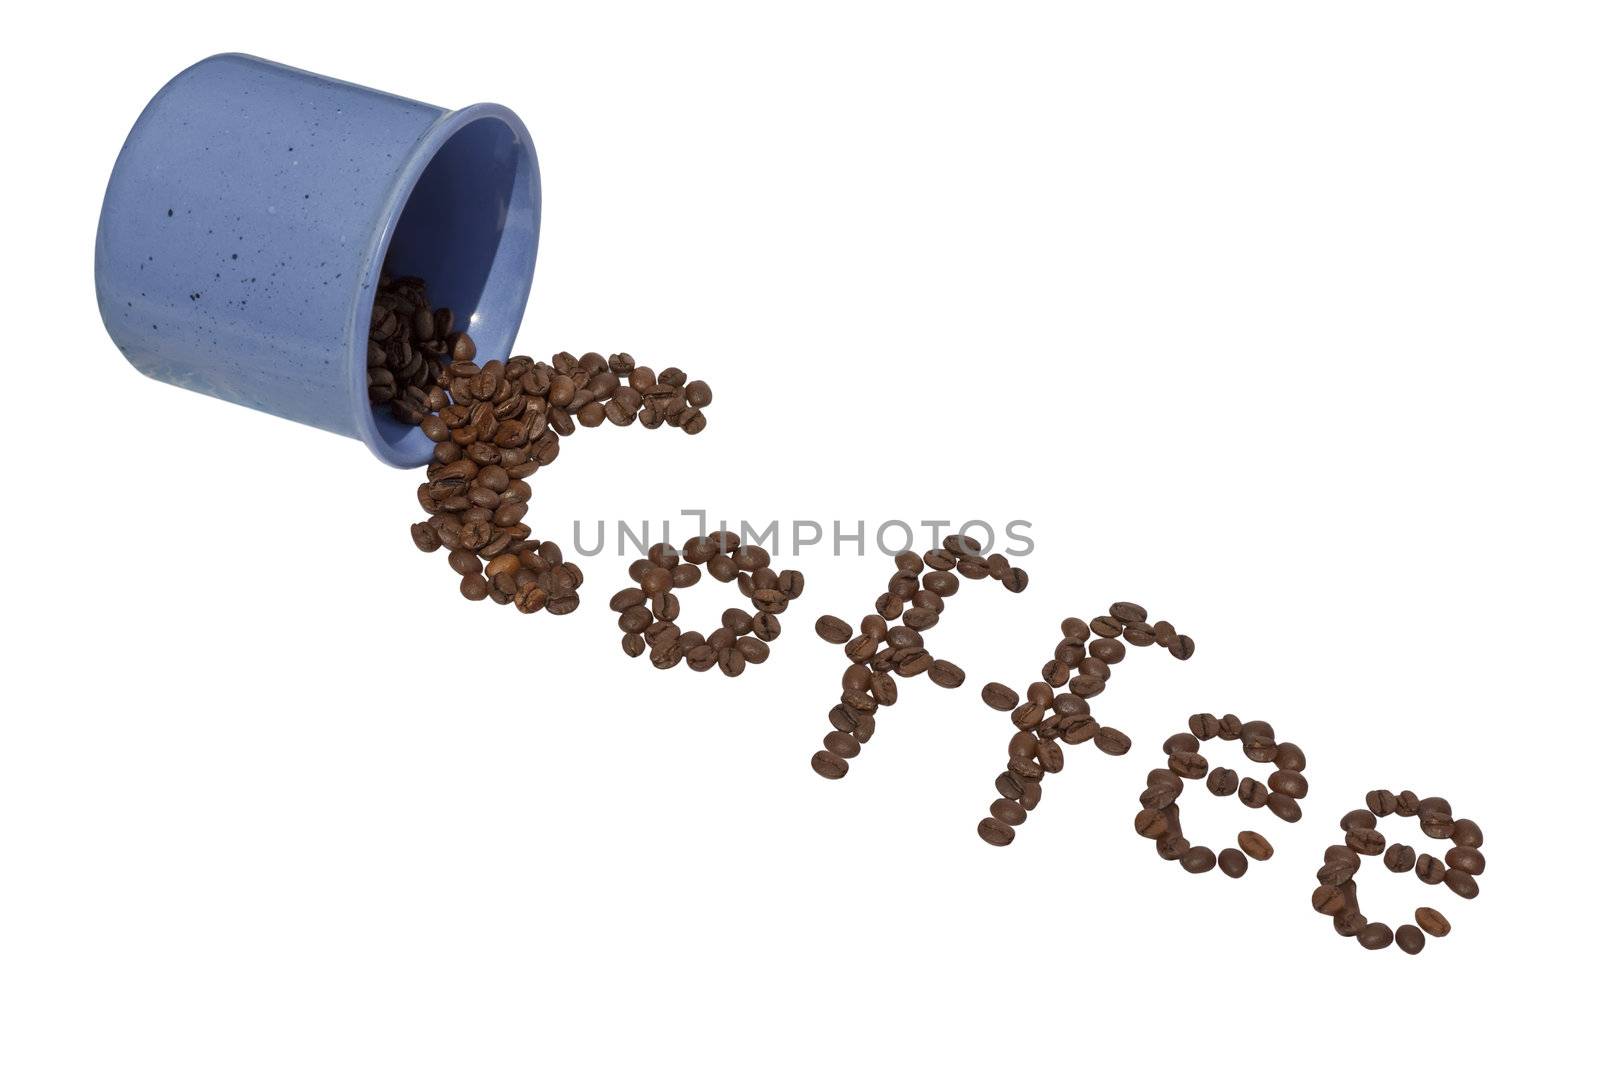 This image shows coffee bean with lettering